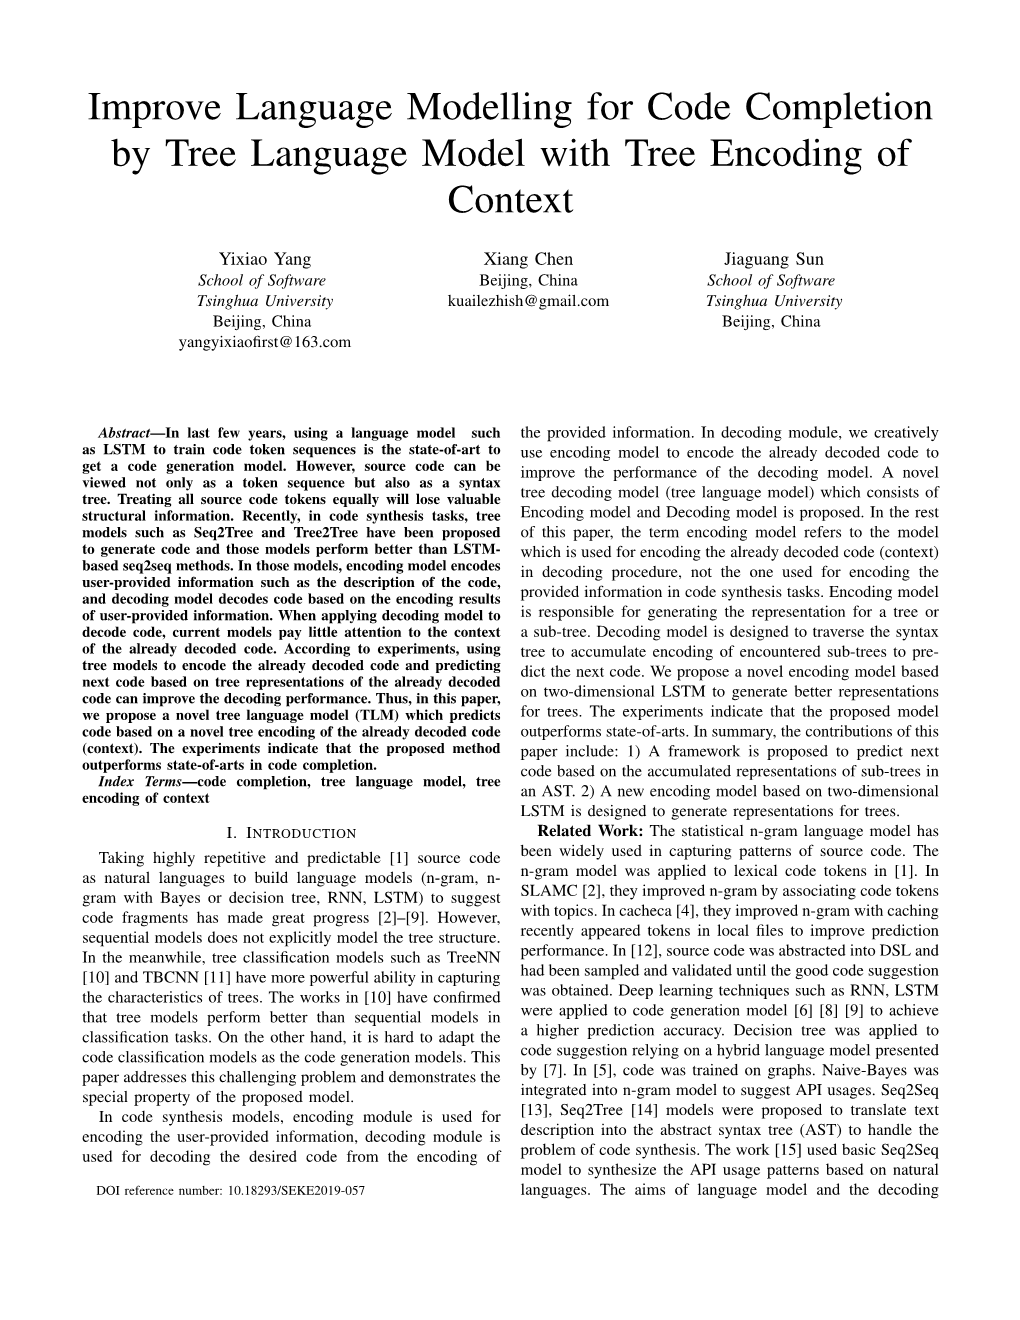 Improve Language Modelling for Code Completion by Tree Language Model with Tree Encoding of Context